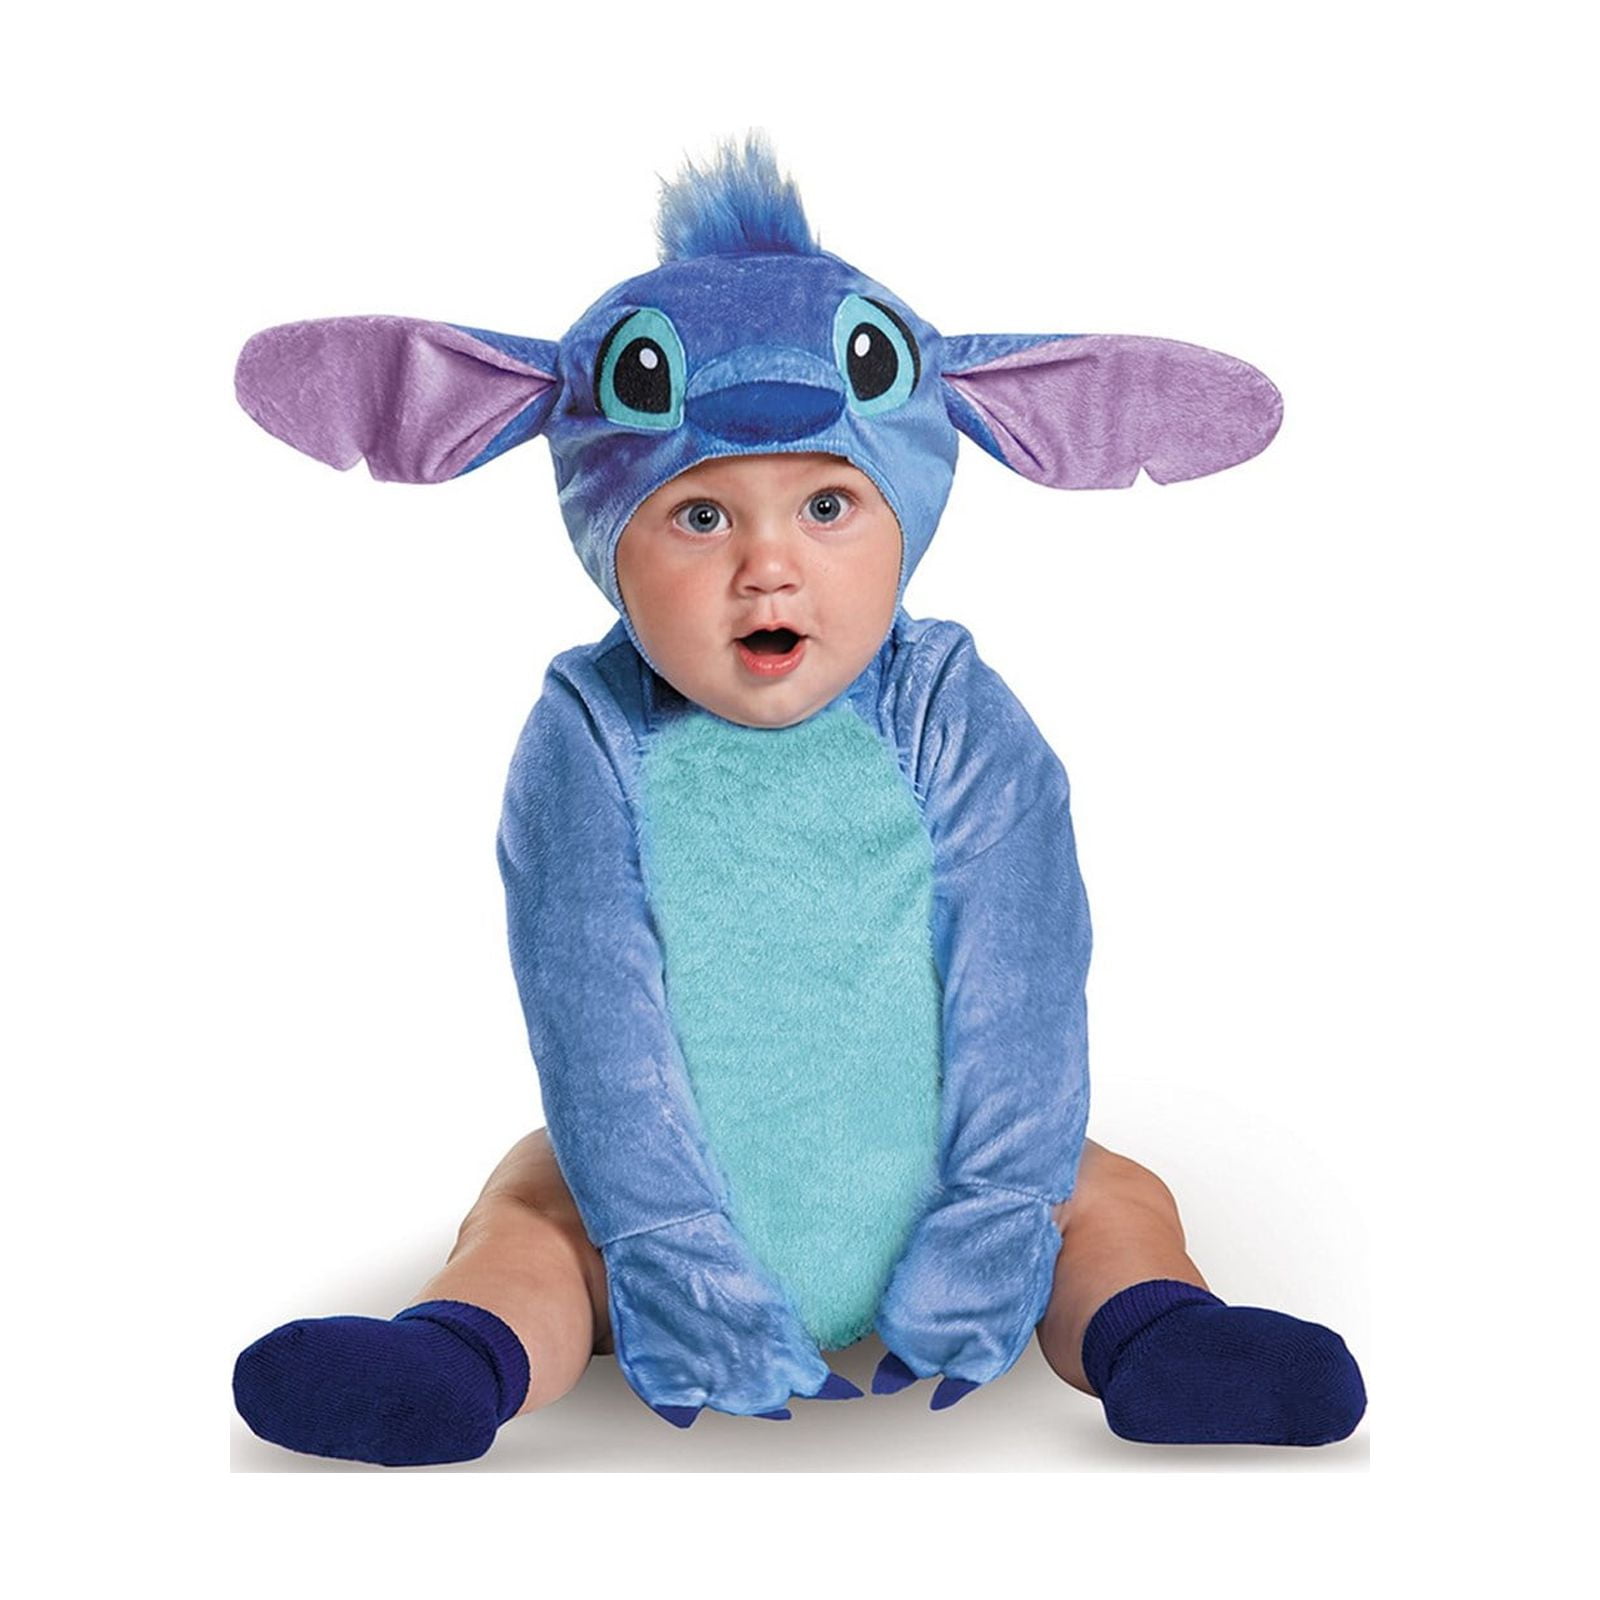 Hand made Lilo costume. Disney's Lilo and Stitch inspired costume. www.ba…   Baby girl halloween costumes, Cute baby halloween costumes, Halloween  costumes for kids